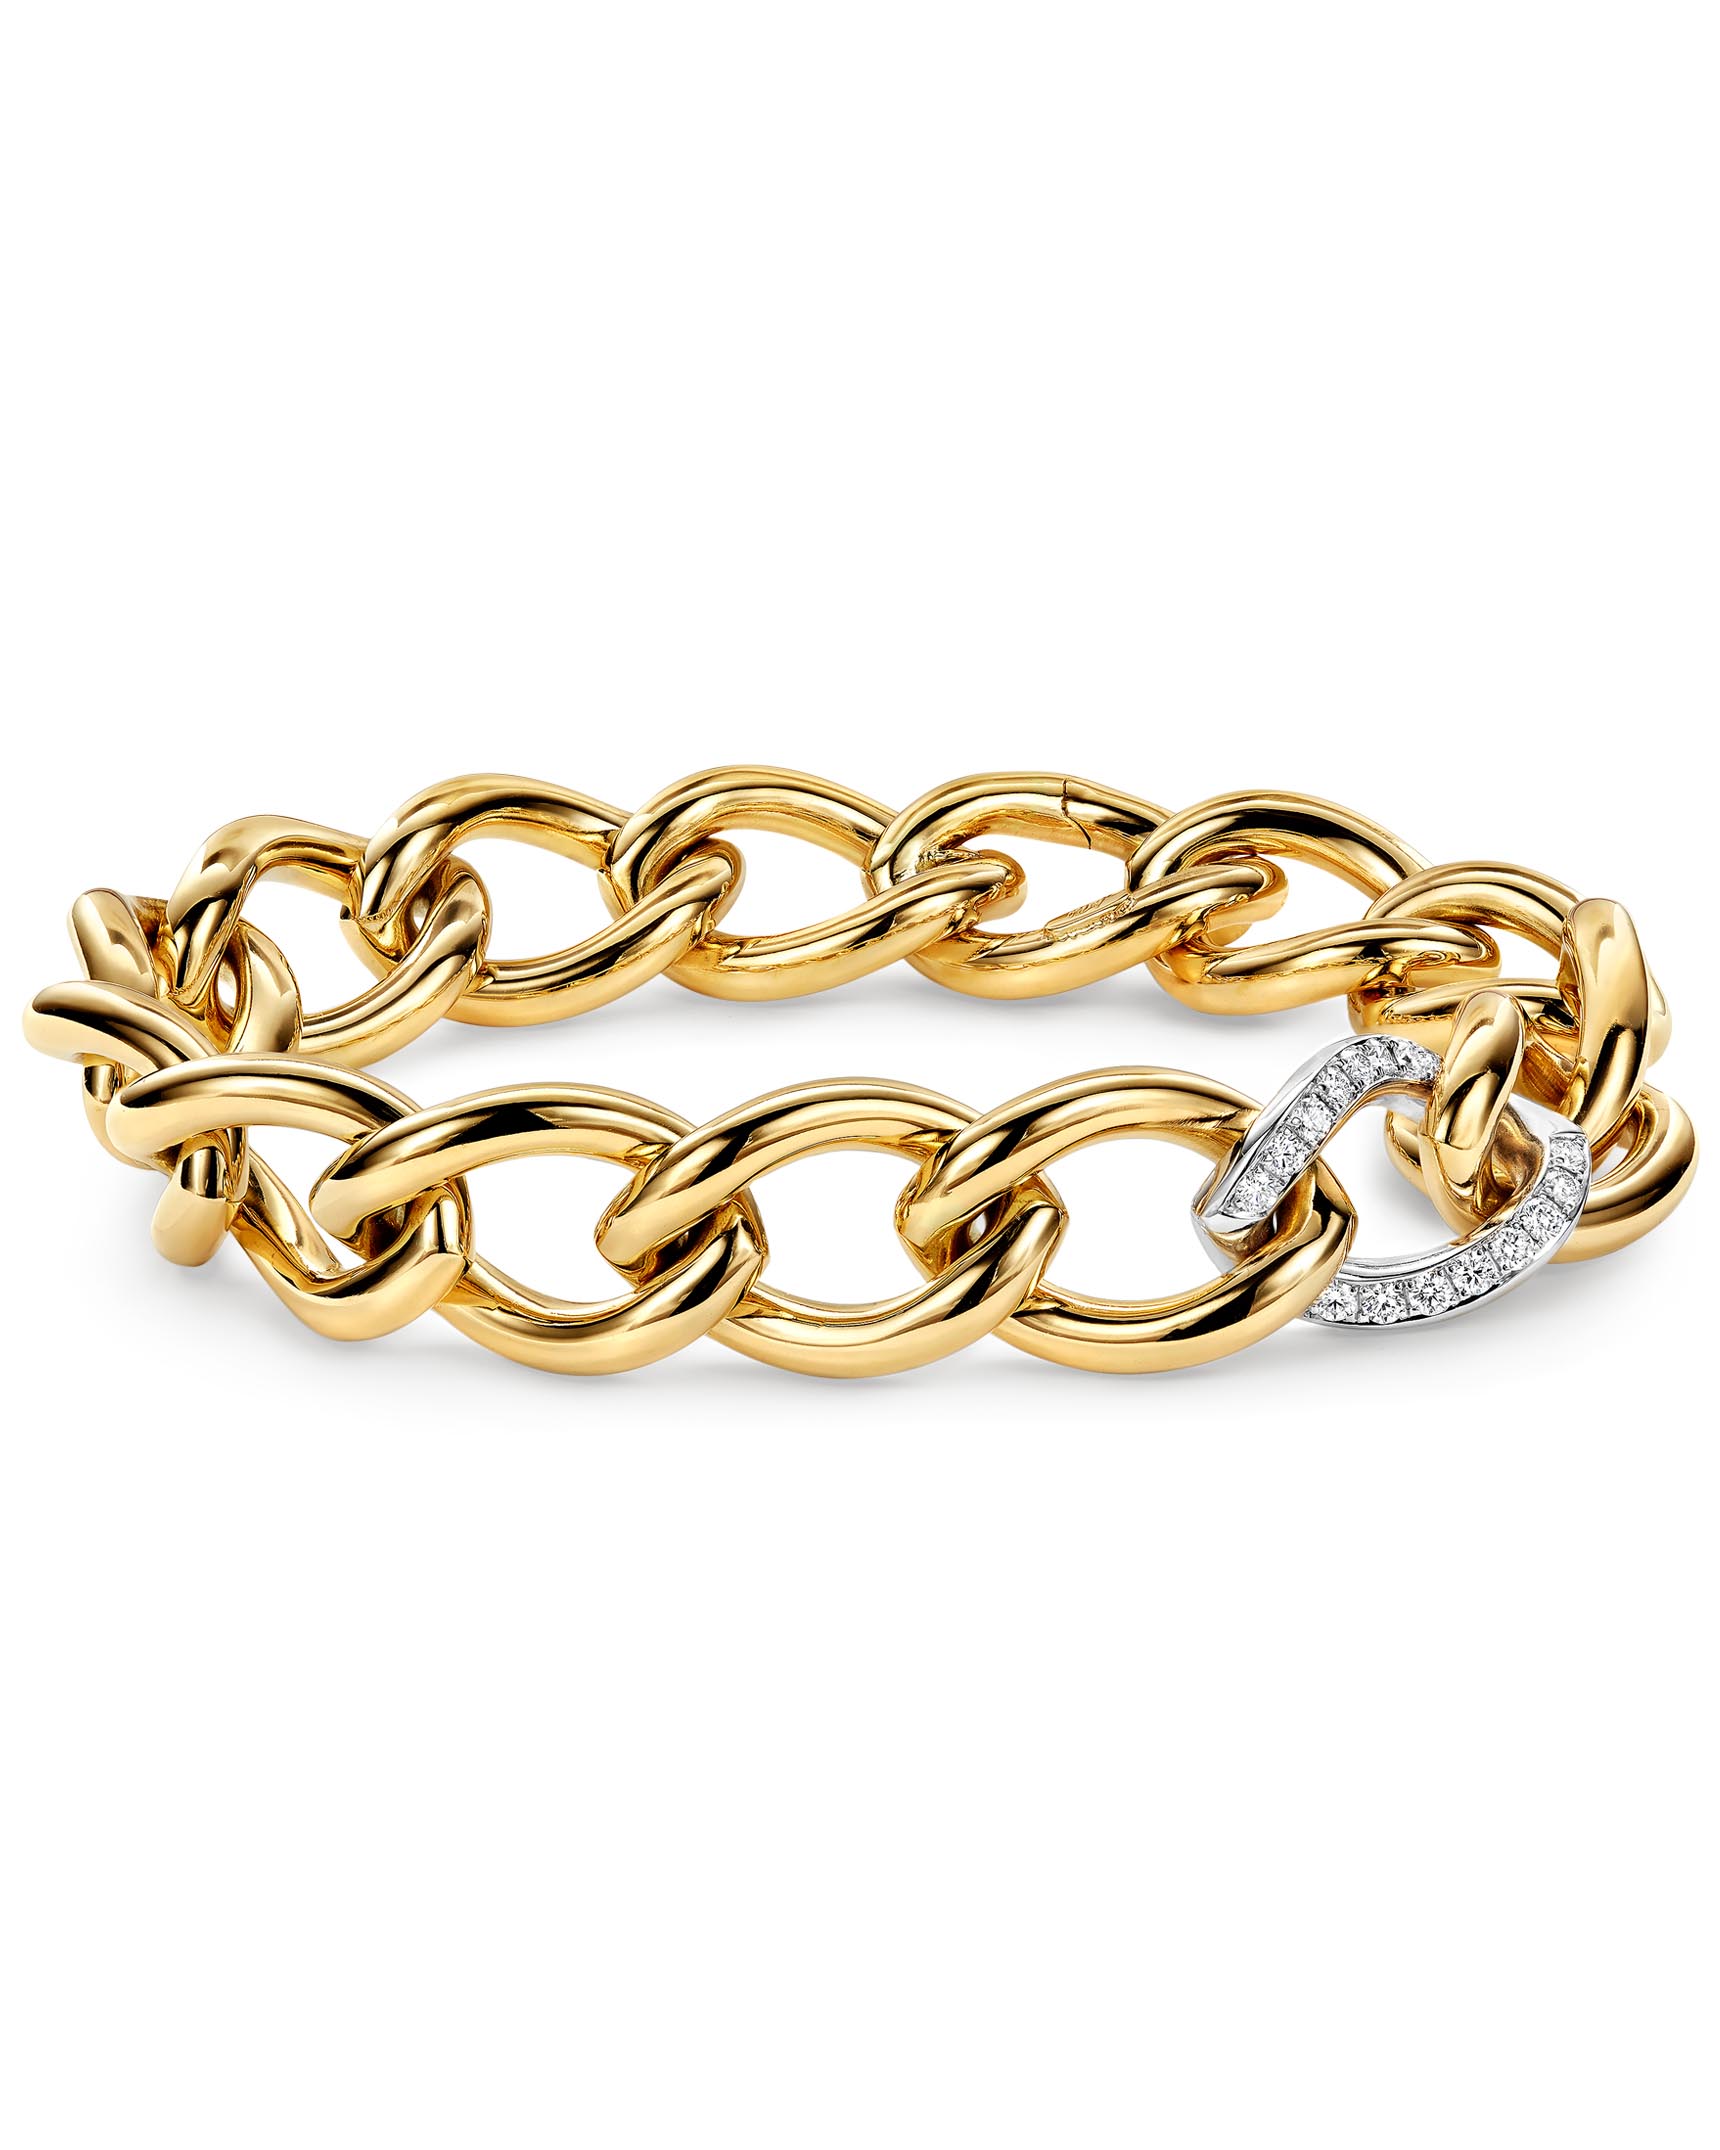 14K Yellow Gold Gent's Double Twist Link Bracelet | More Than Just Rings